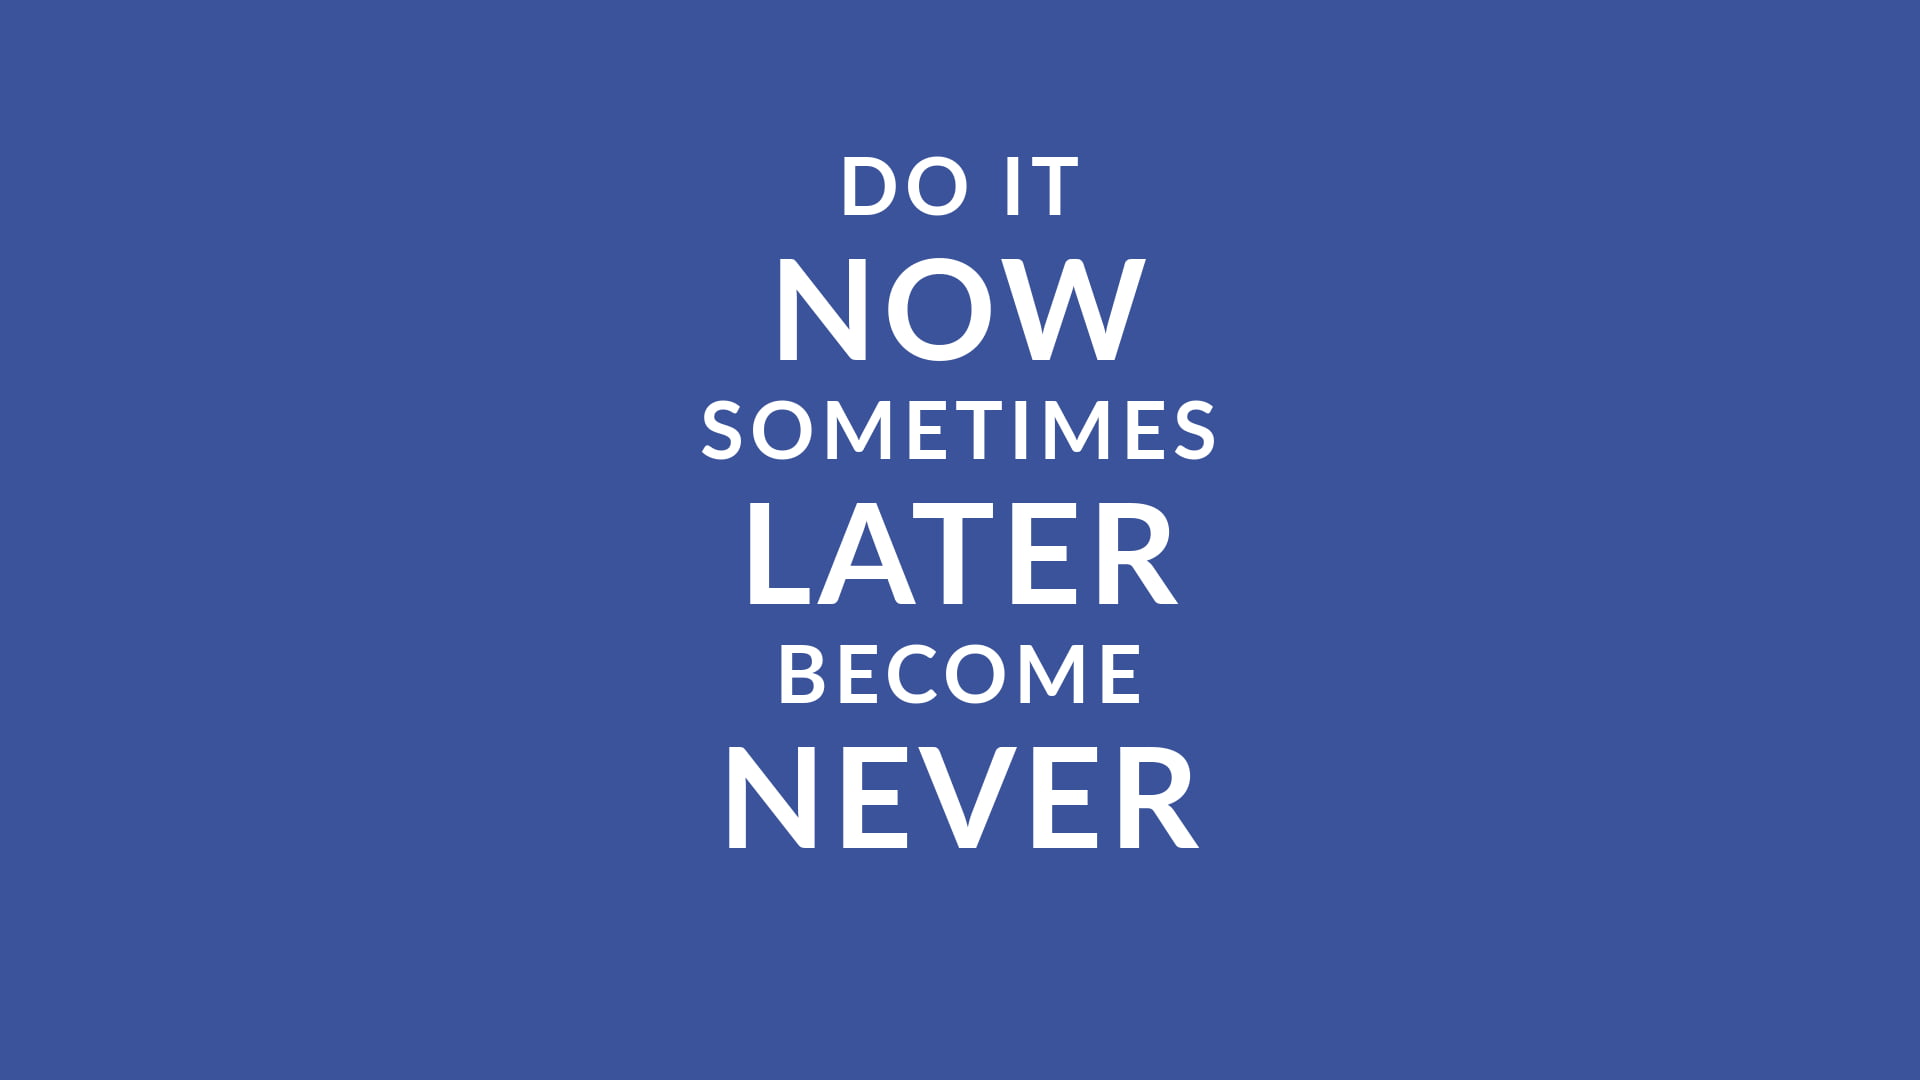 dot it now sometimes later become never text, quote, simple, simple background